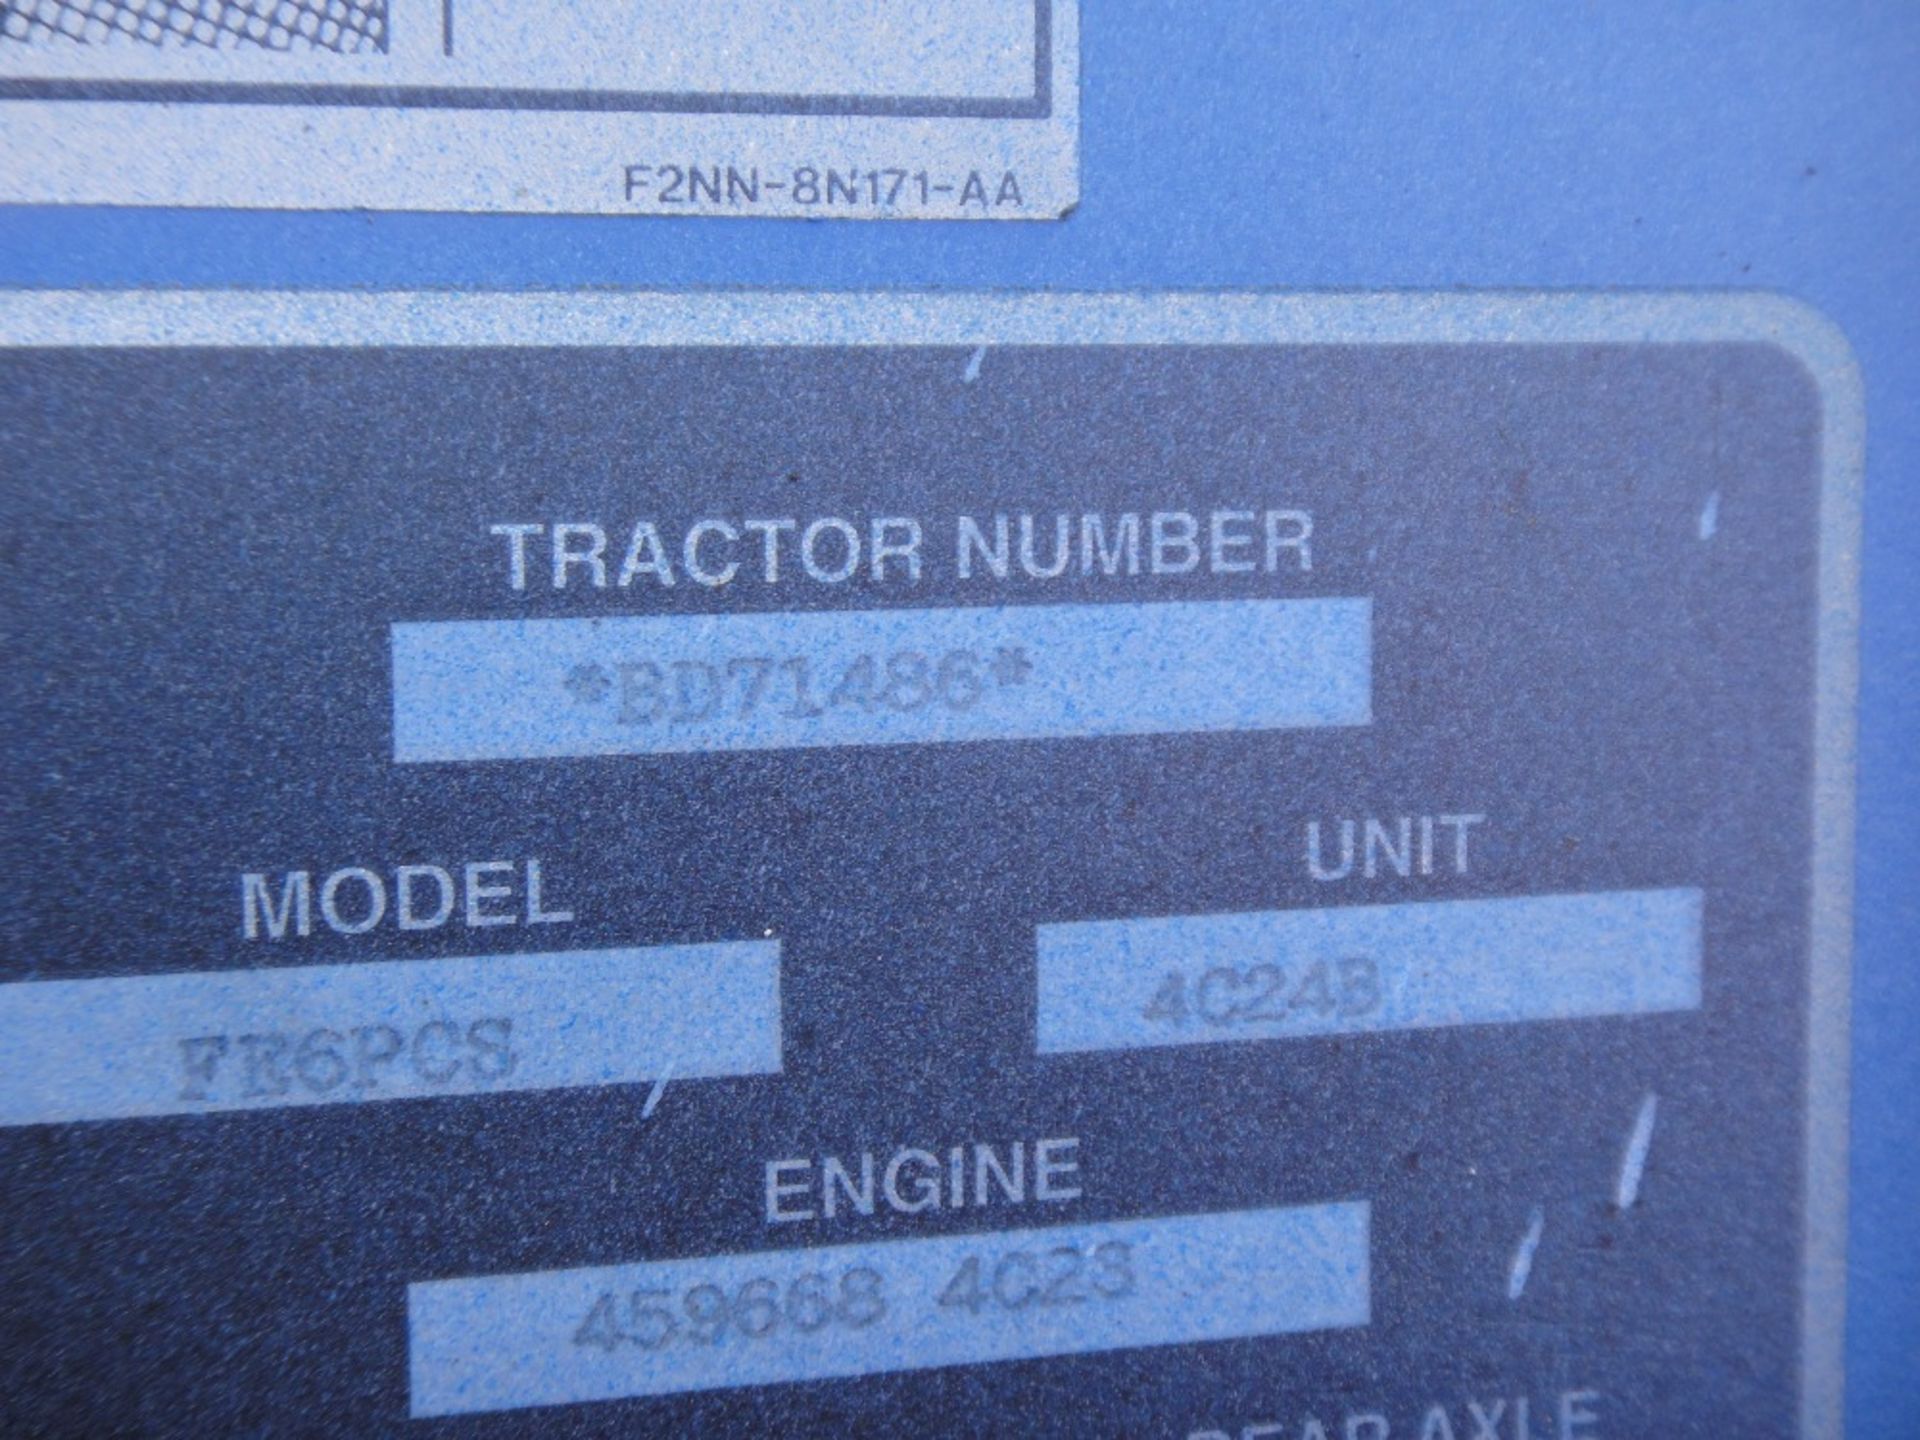 1994 Ford/New Holland 7840 SLDP 4wd Tractor. Circa 8200 hrs. French registration book will be - Image 14 of 14